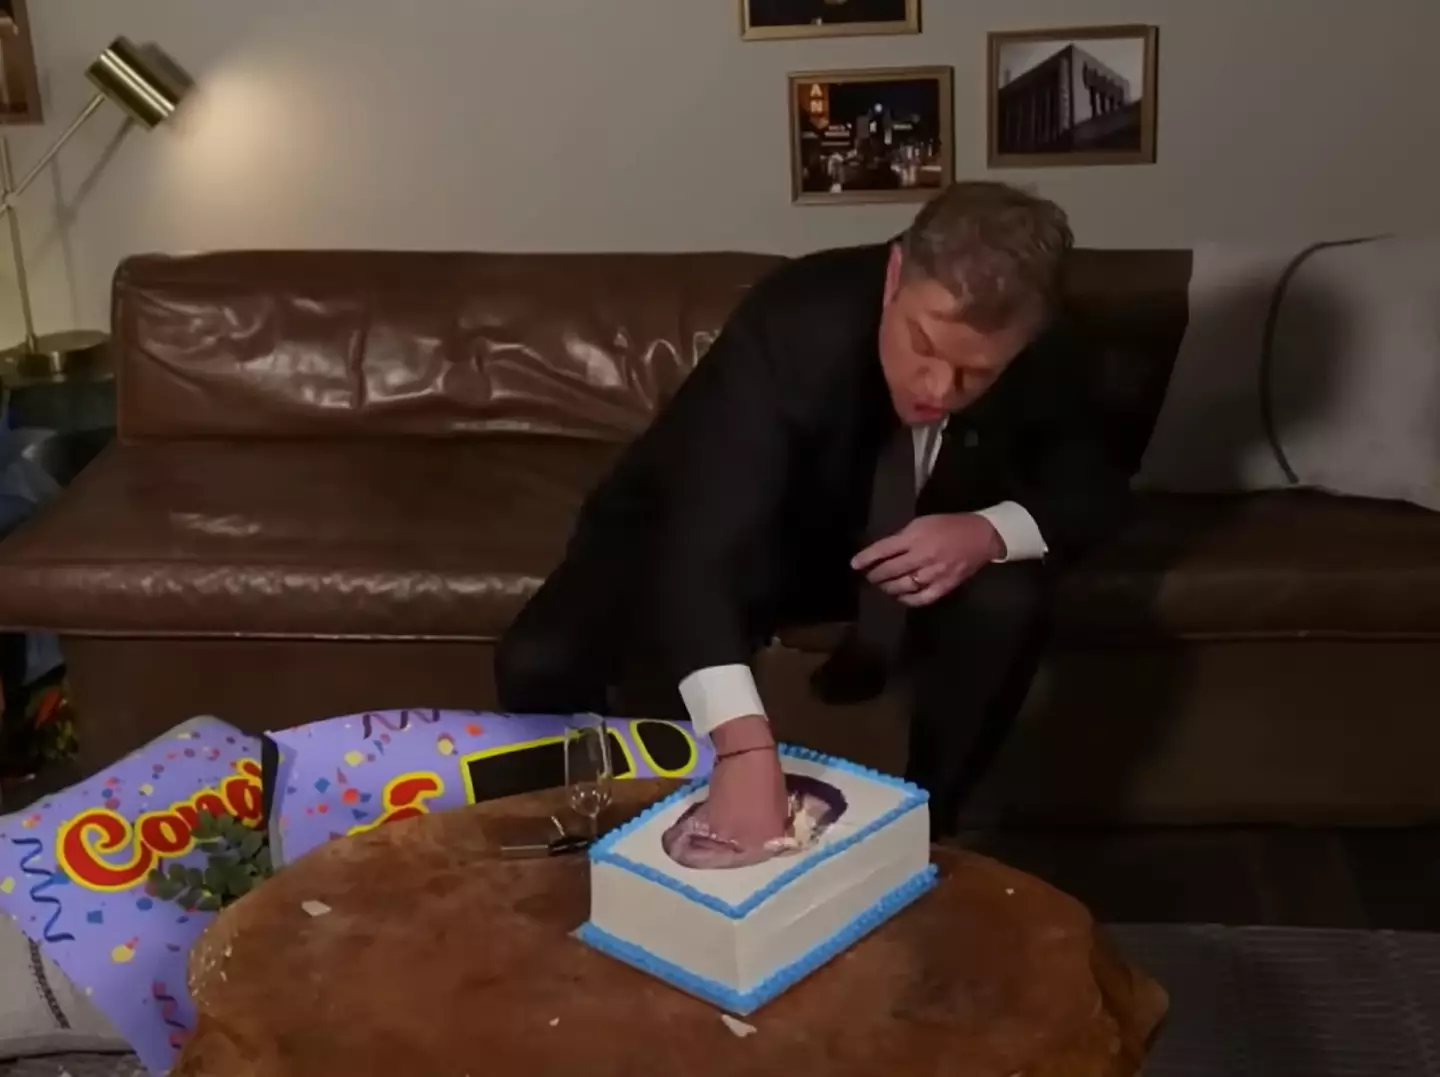 Damon destroyed a cake with Kimmel's face on it.